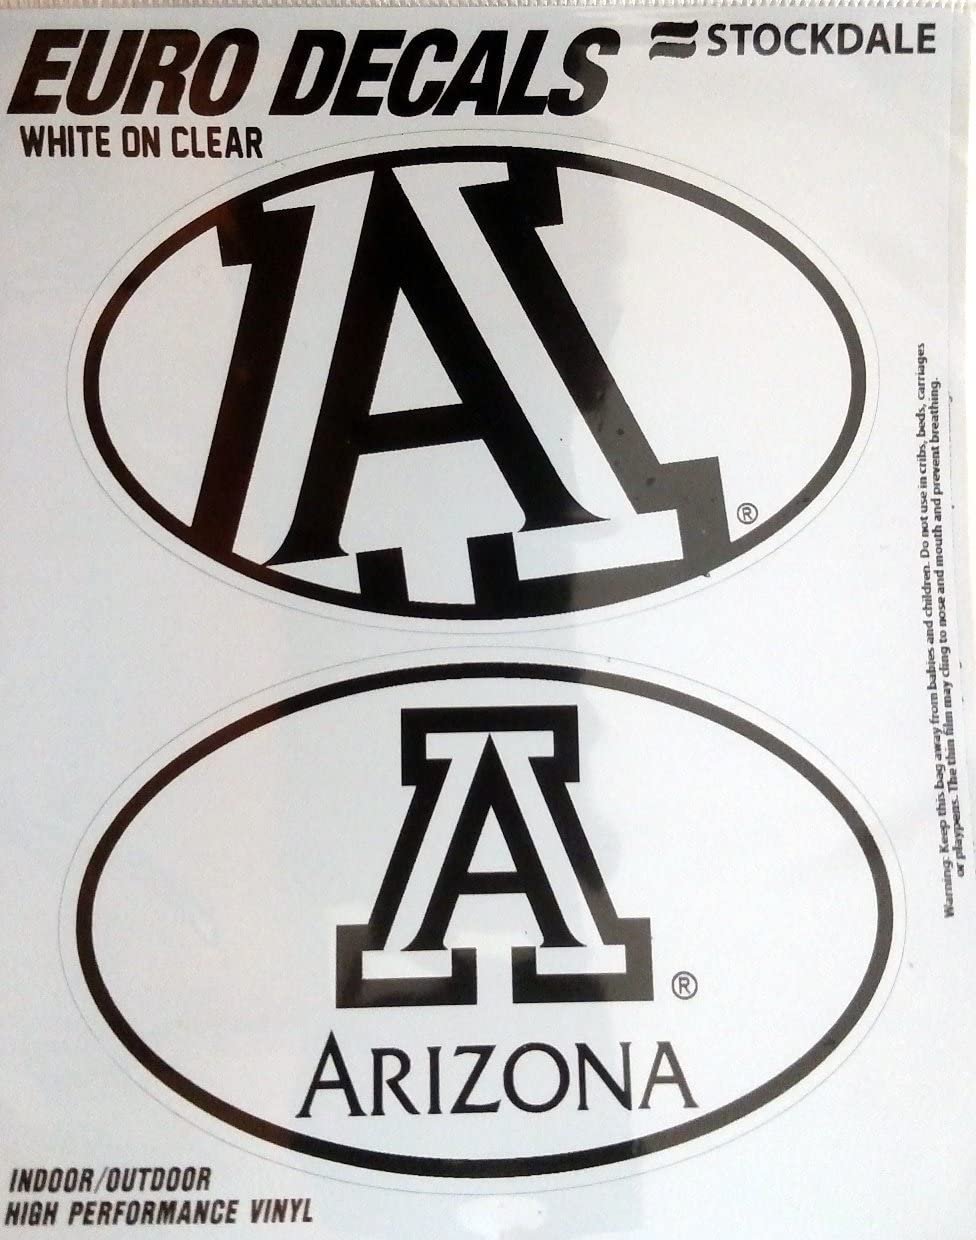 University of Arizona Wildcats 2-Piece White and Clear Euro Decal Sticker Set, 4x2.5 Inch Each